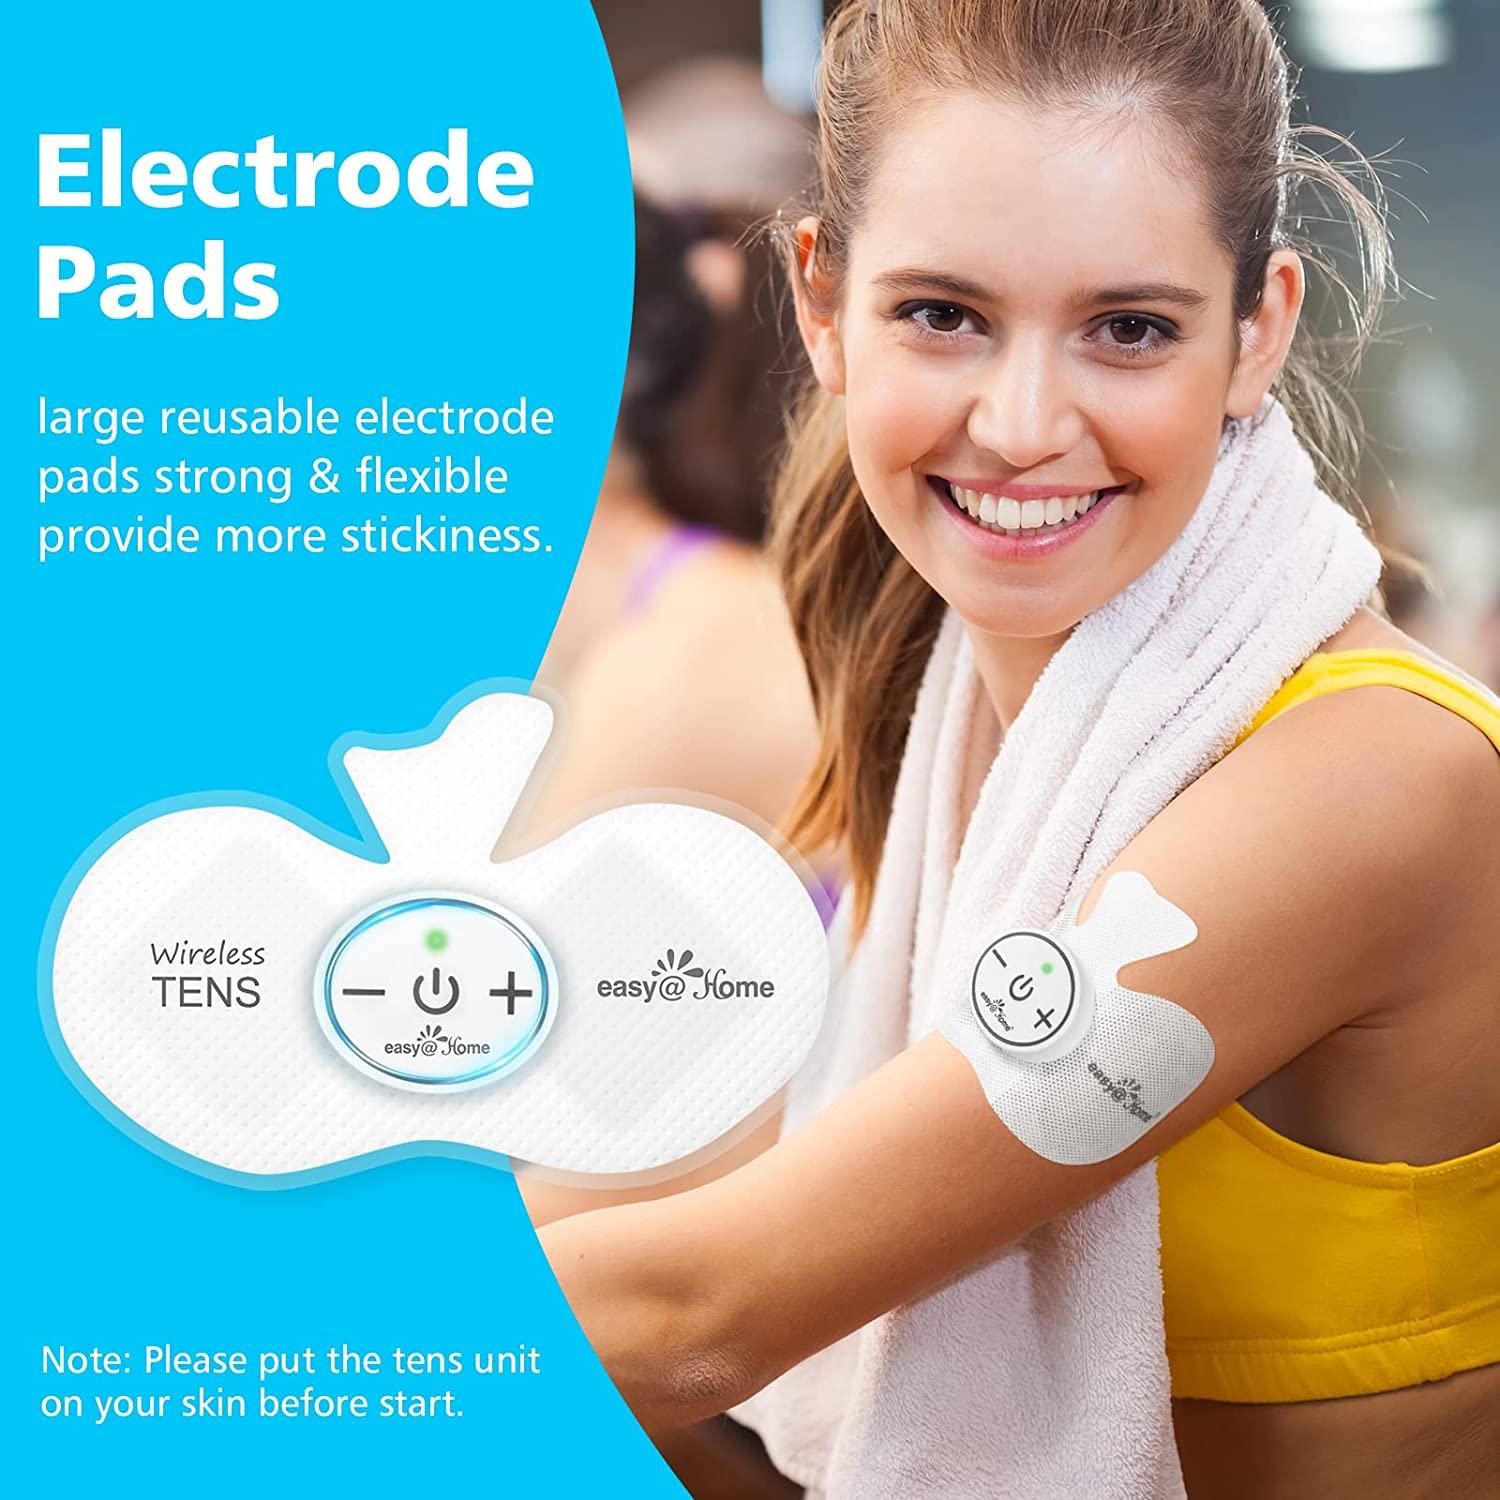  Easy@Home Rechargeable Compact Wireless TENS Unit - 510K  Cleared, FSA Eligible Electric EMS Muscle Stimulator Pain Relief Therapy,  Portable Pain Management Device EHE015 : Health & Household